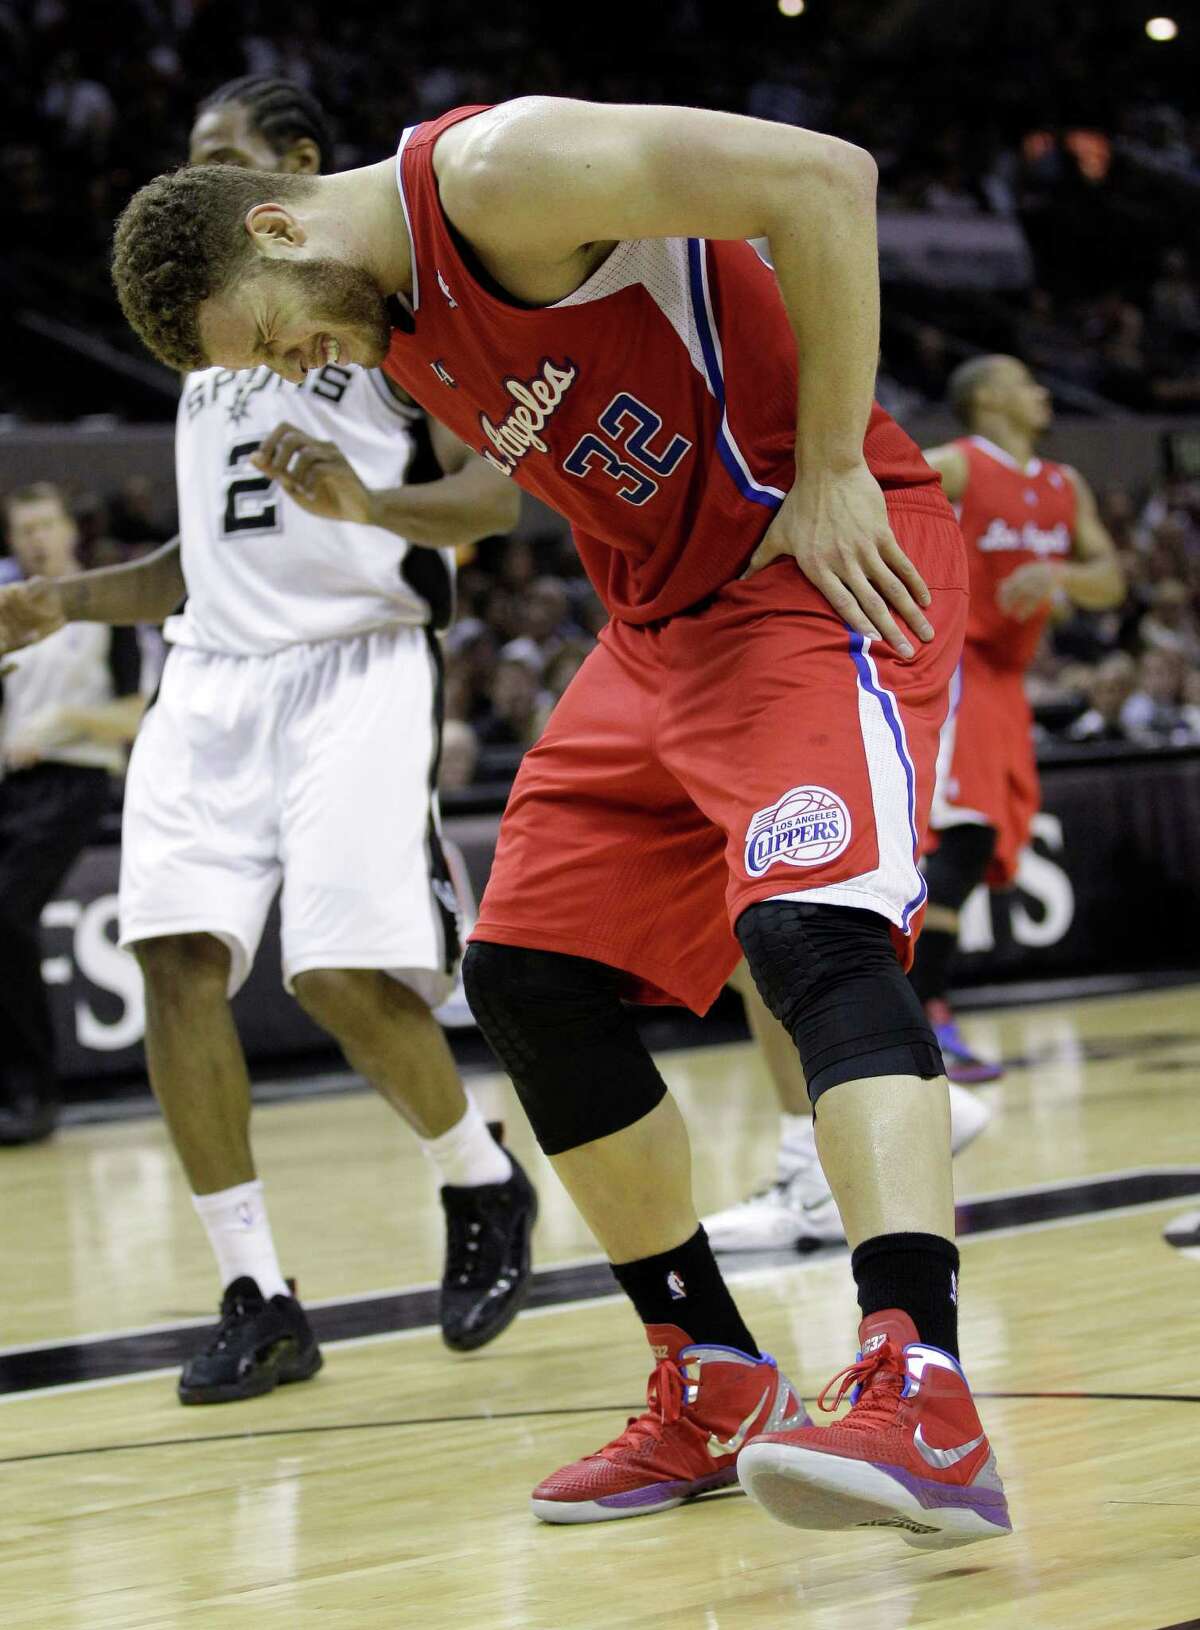 Los Angeles Clippers' Blake Griffin holds his leg during the fourth quarter of Game 2 of an NBA basketball Western Conference semifinal playoff series against the San Antonio Spurs, Thursday, May 17, 2012, in San Antonio. San Antonio won 105-88. (AP Photo/Eric Gay)